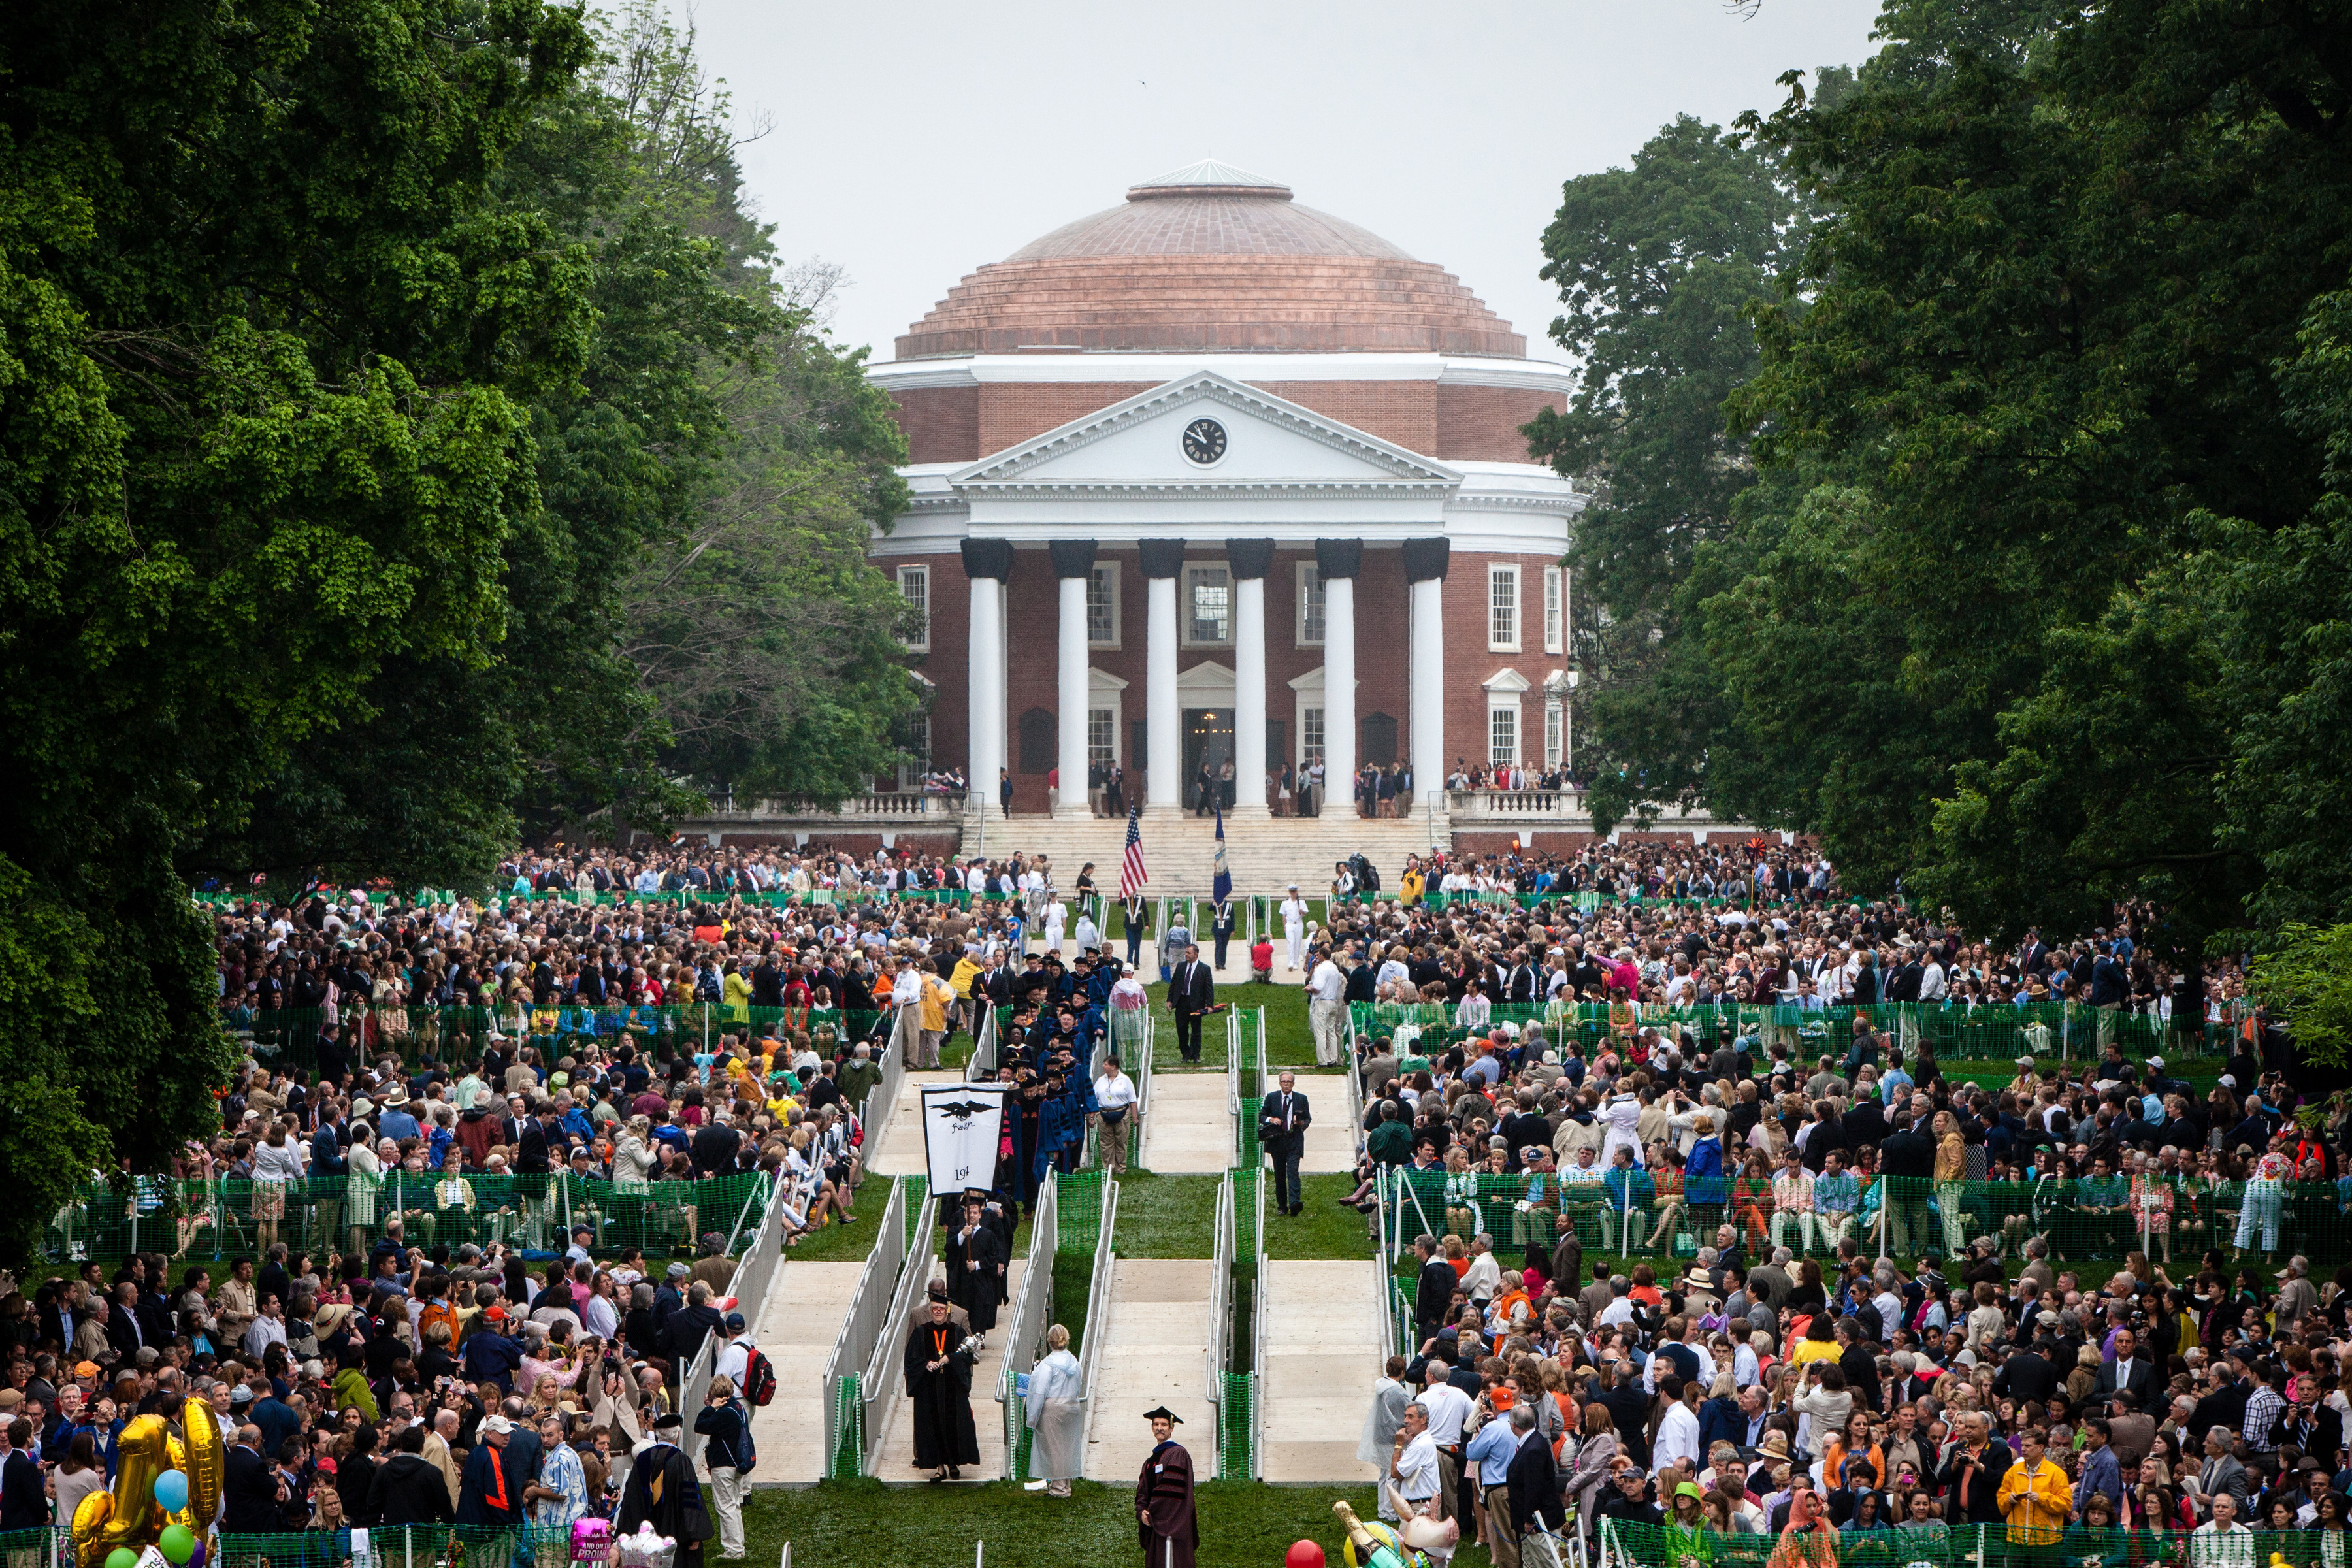 Graduates walking across the lawn from the Rotunda to their seats